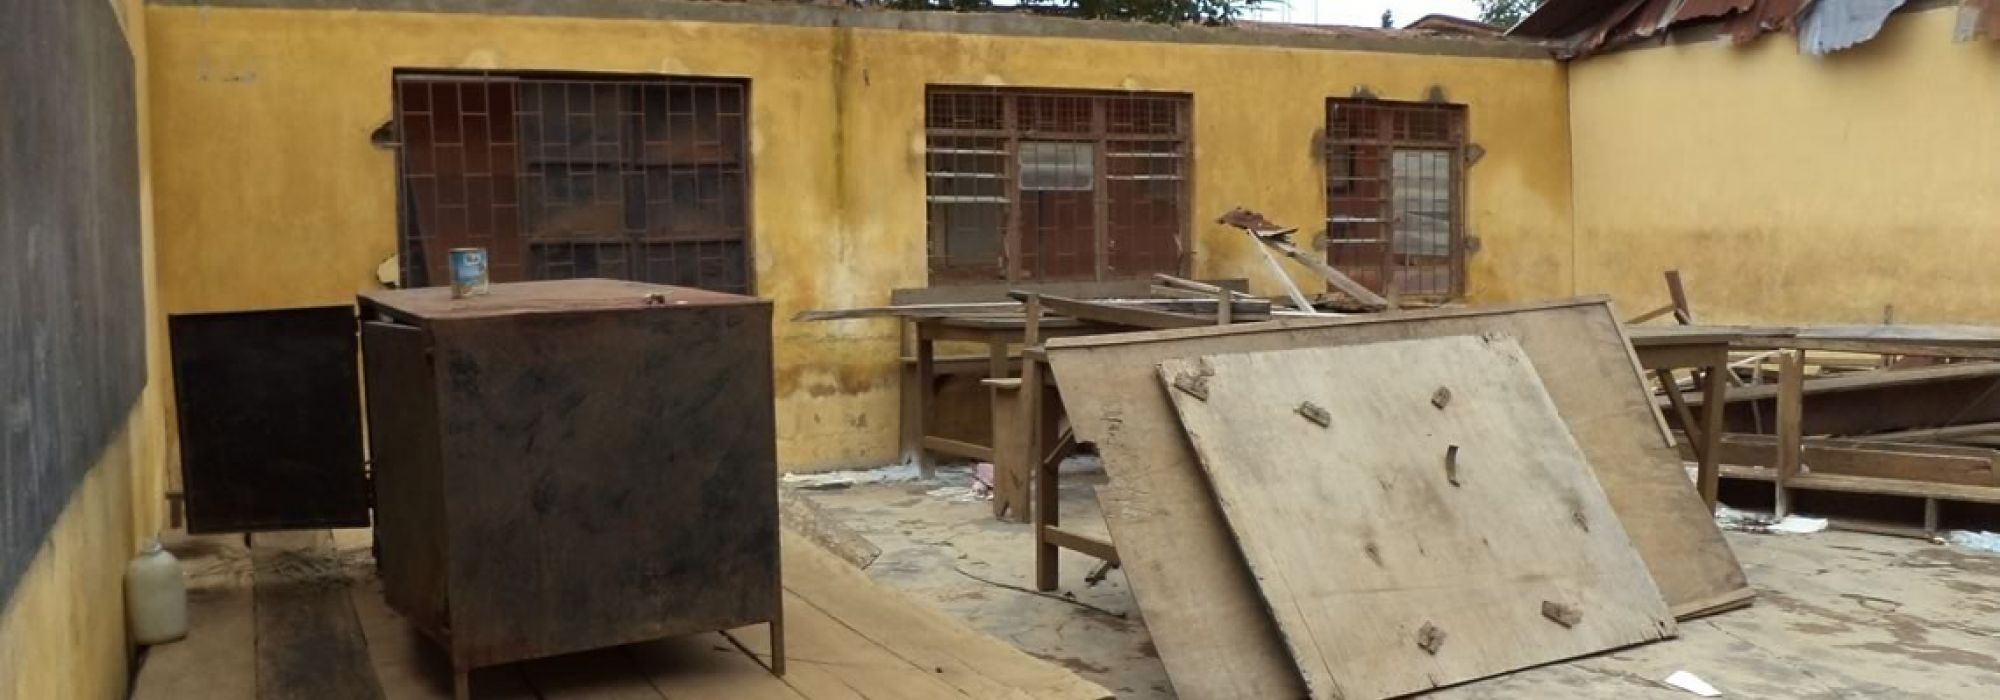 A classroom with yellow walls appears to have had its roof ripped off from a natural disaster. Scattered wood and desk remnants on the floor.